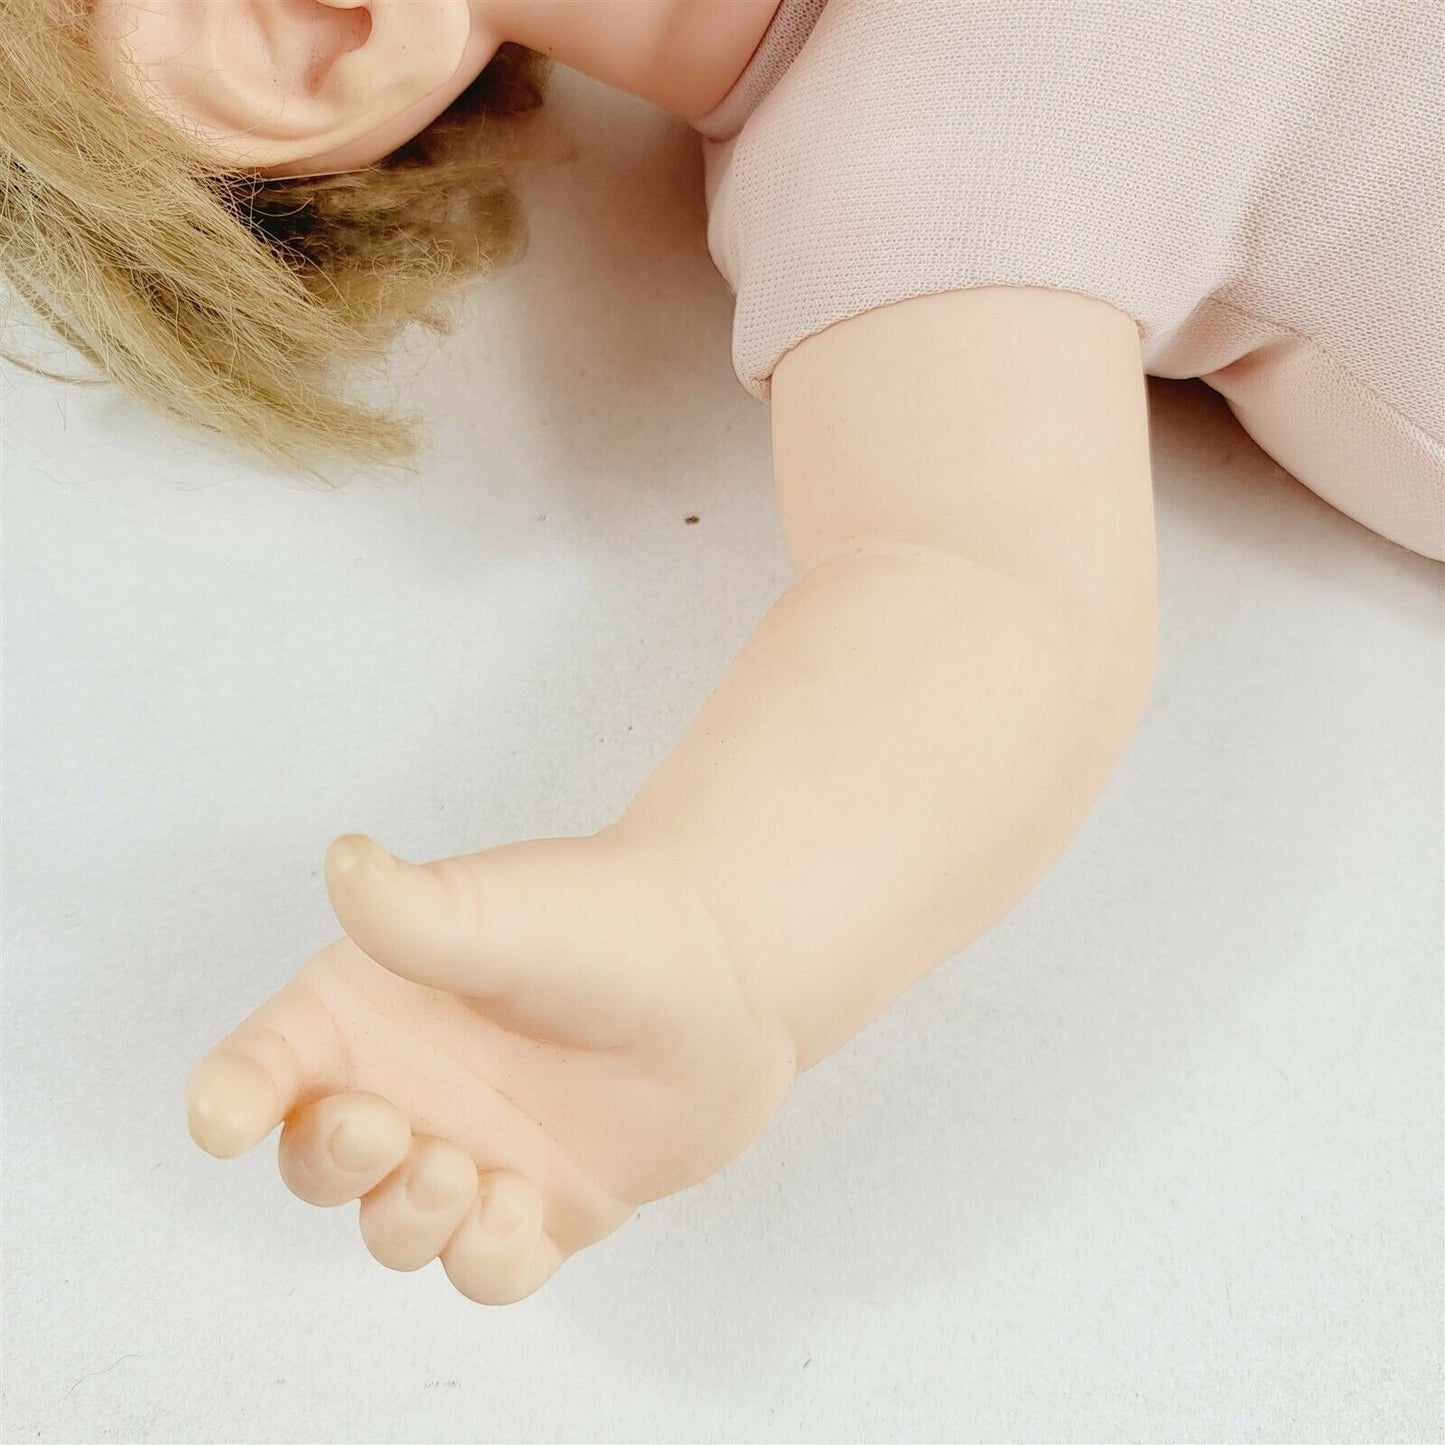 Hasbro Real Baby Doll 1984 J. Turner No Clothing Needs Cleaning 19"